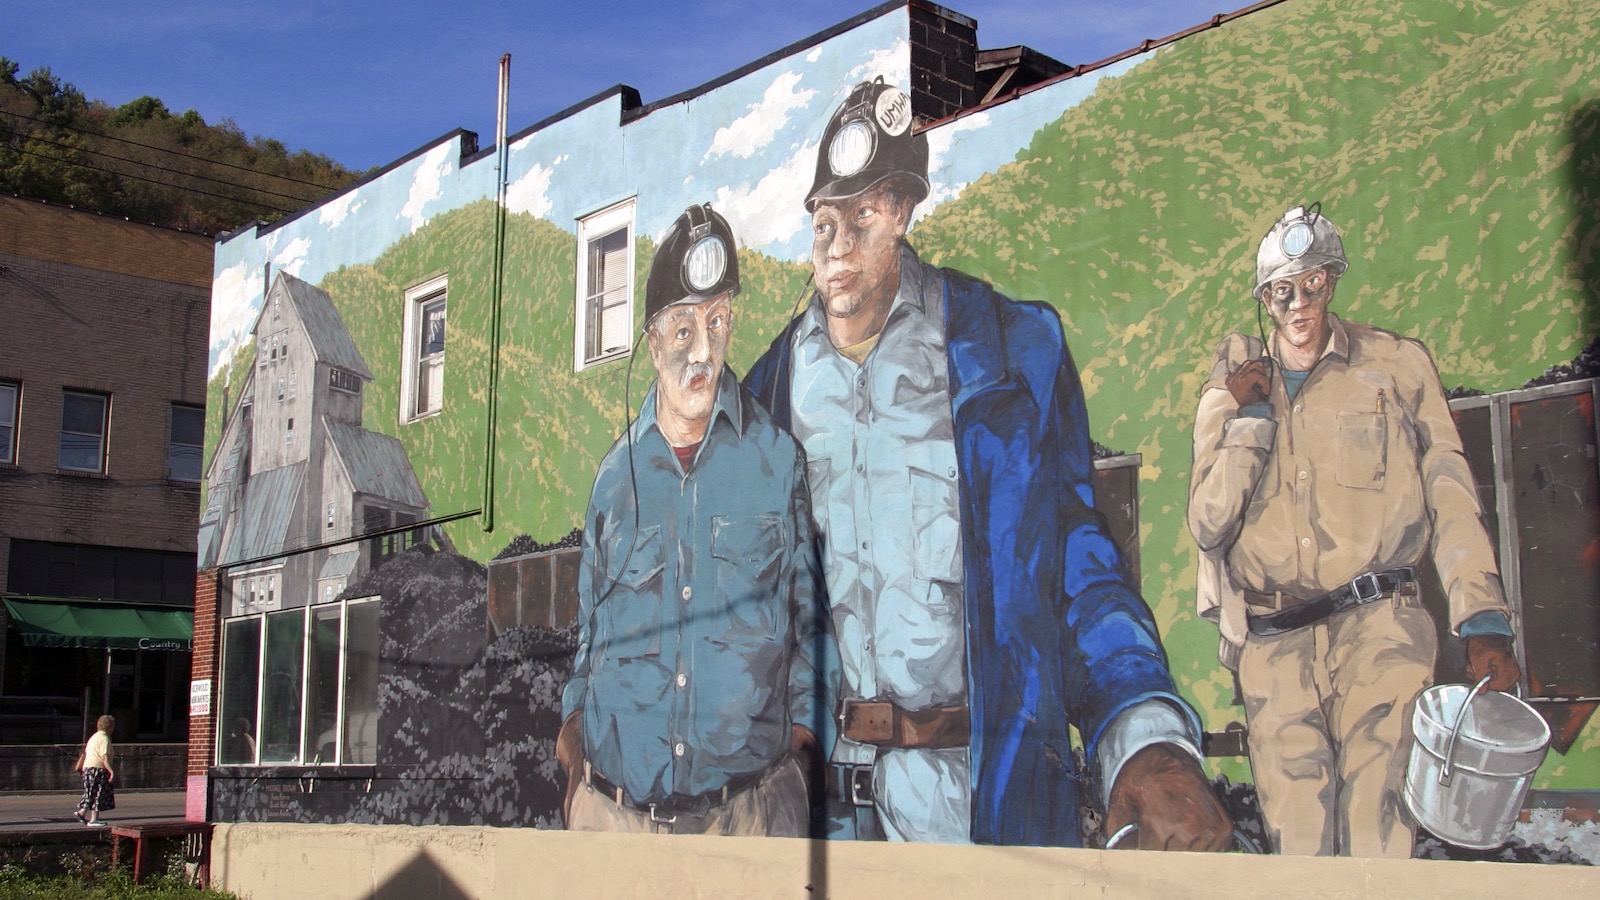 A mural depicting three coal miners is seen on the side of a building in rural West Virginia.